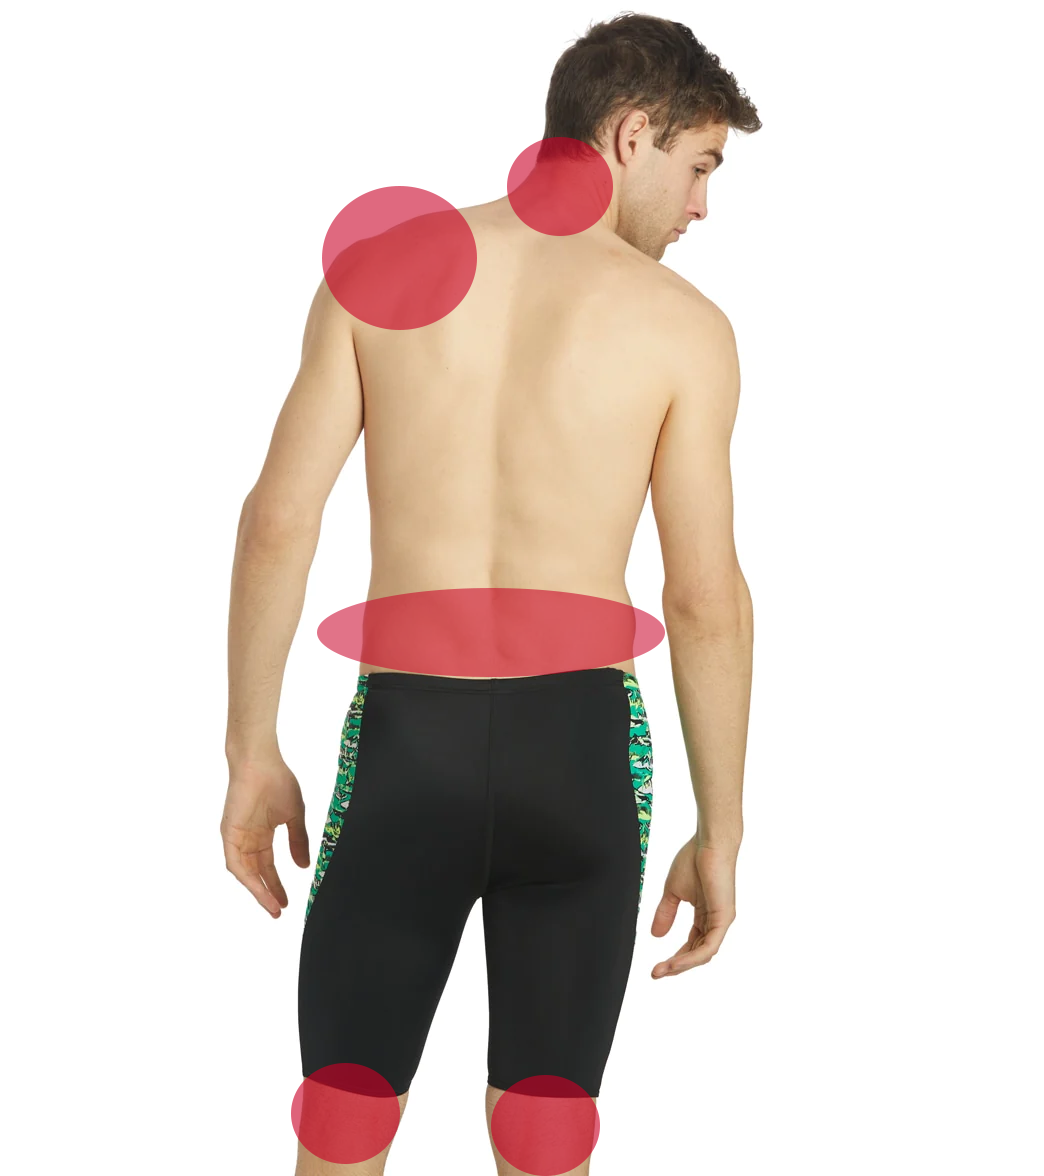 common areas of swimming injuries - shoulders, knees, and lower back.